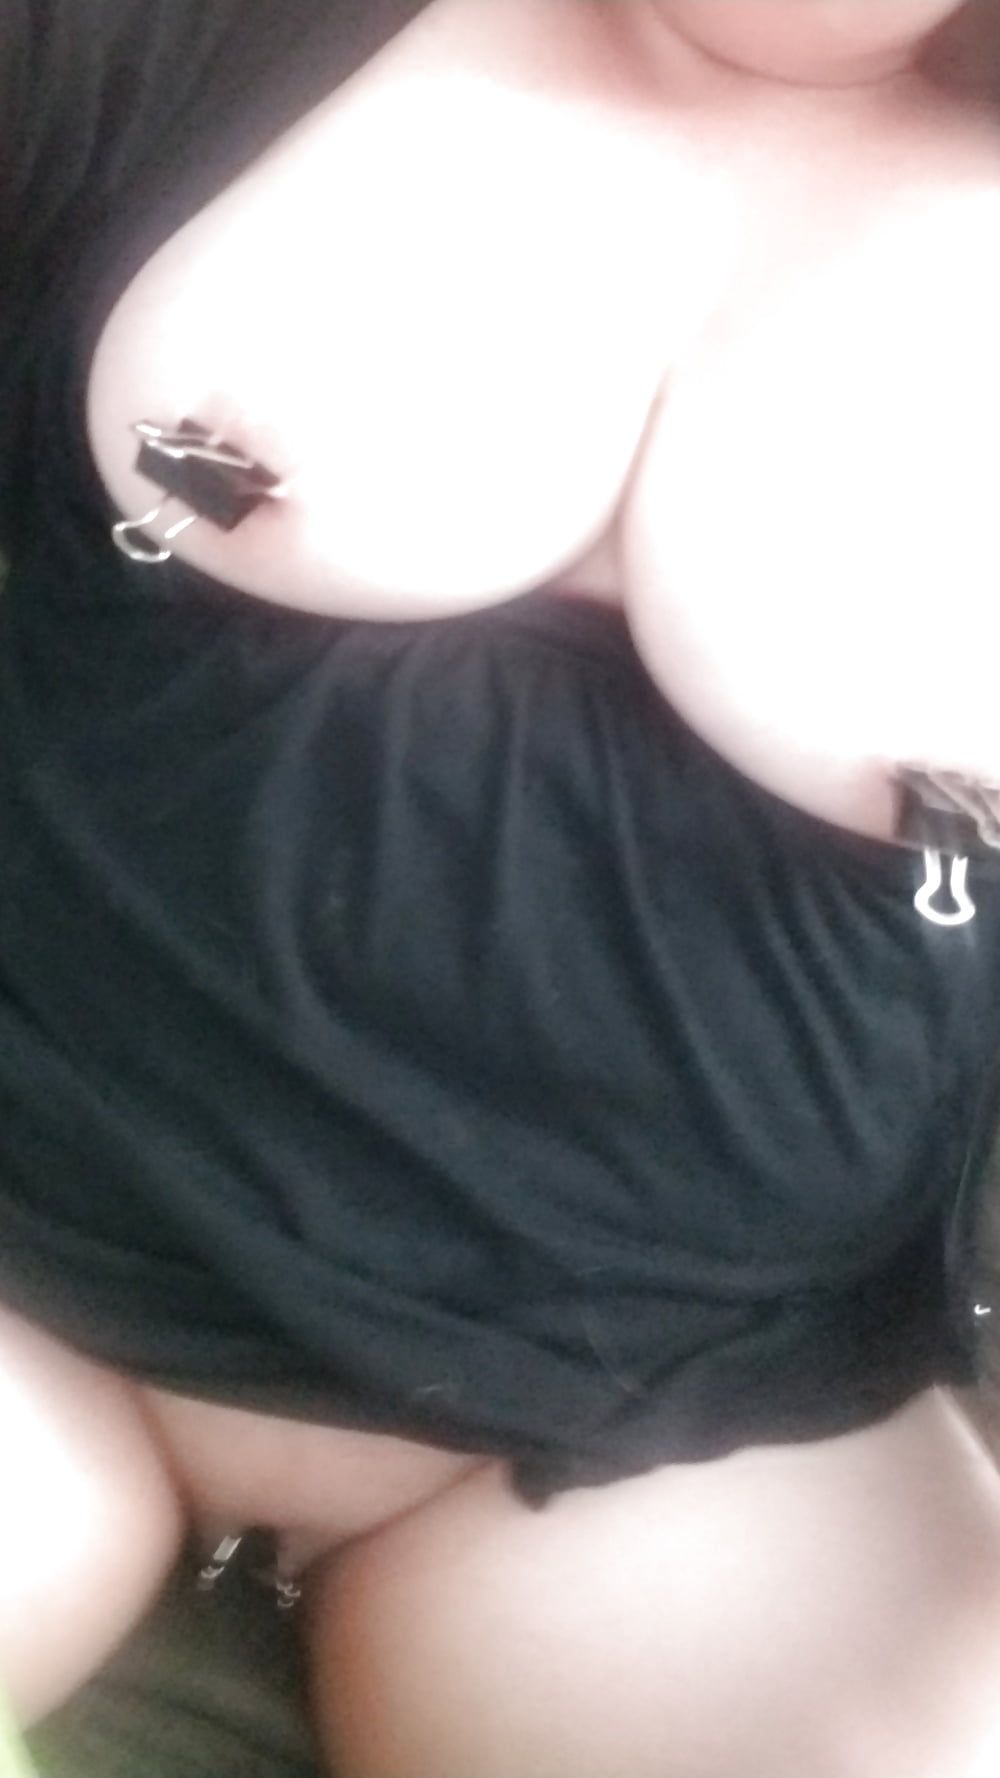 Binder clips on nipples and pussy ... bored housewife.. milf #2